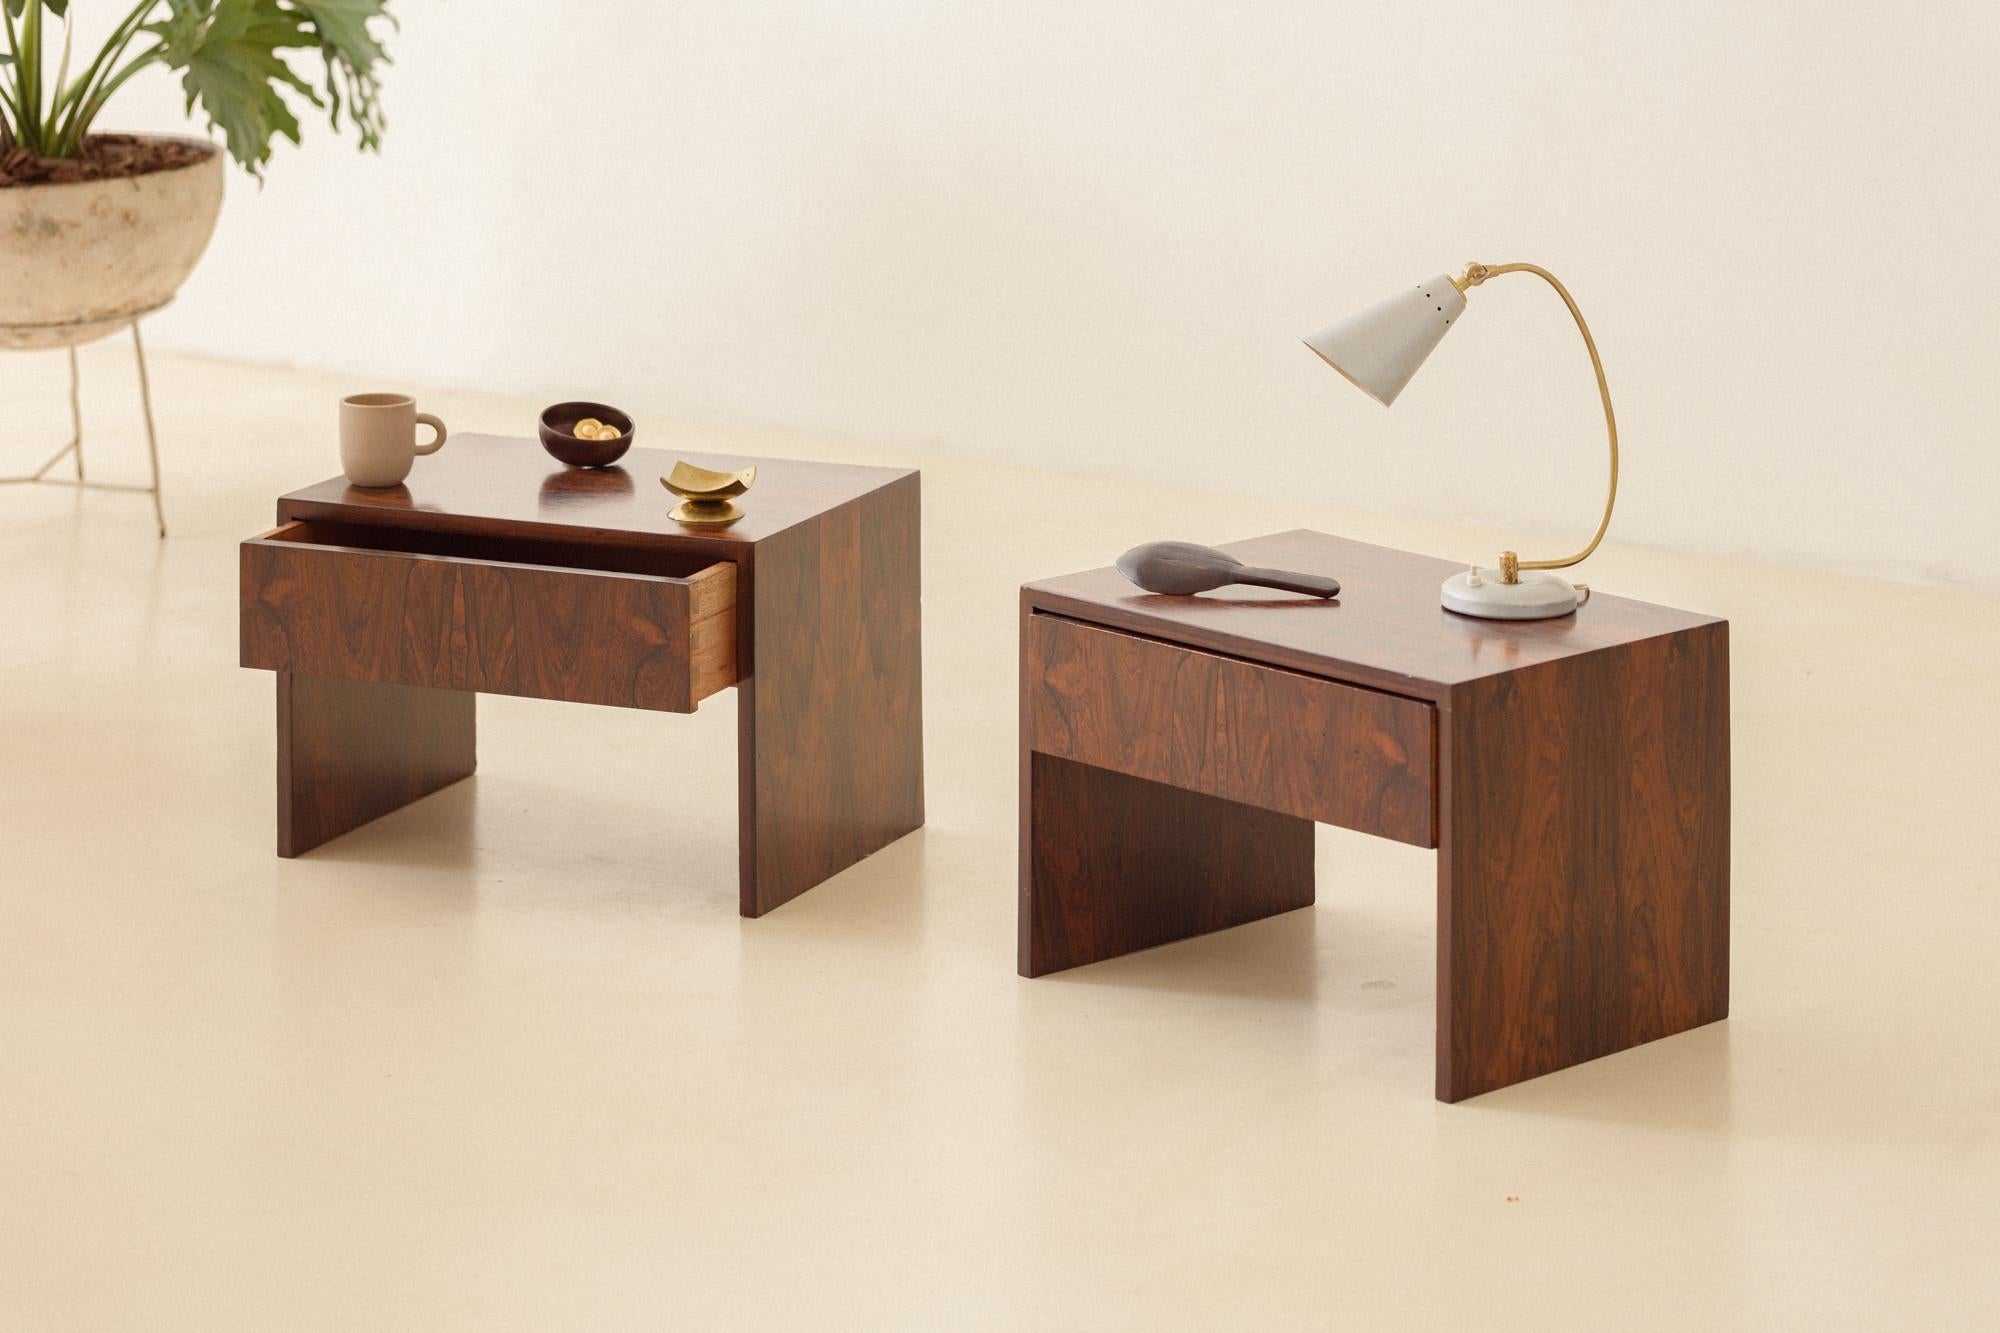 Mid-Century Modern Pair of Rosewood Nightstands by Unknown Designer, 1960s, Brazilian Midcentury For Sale